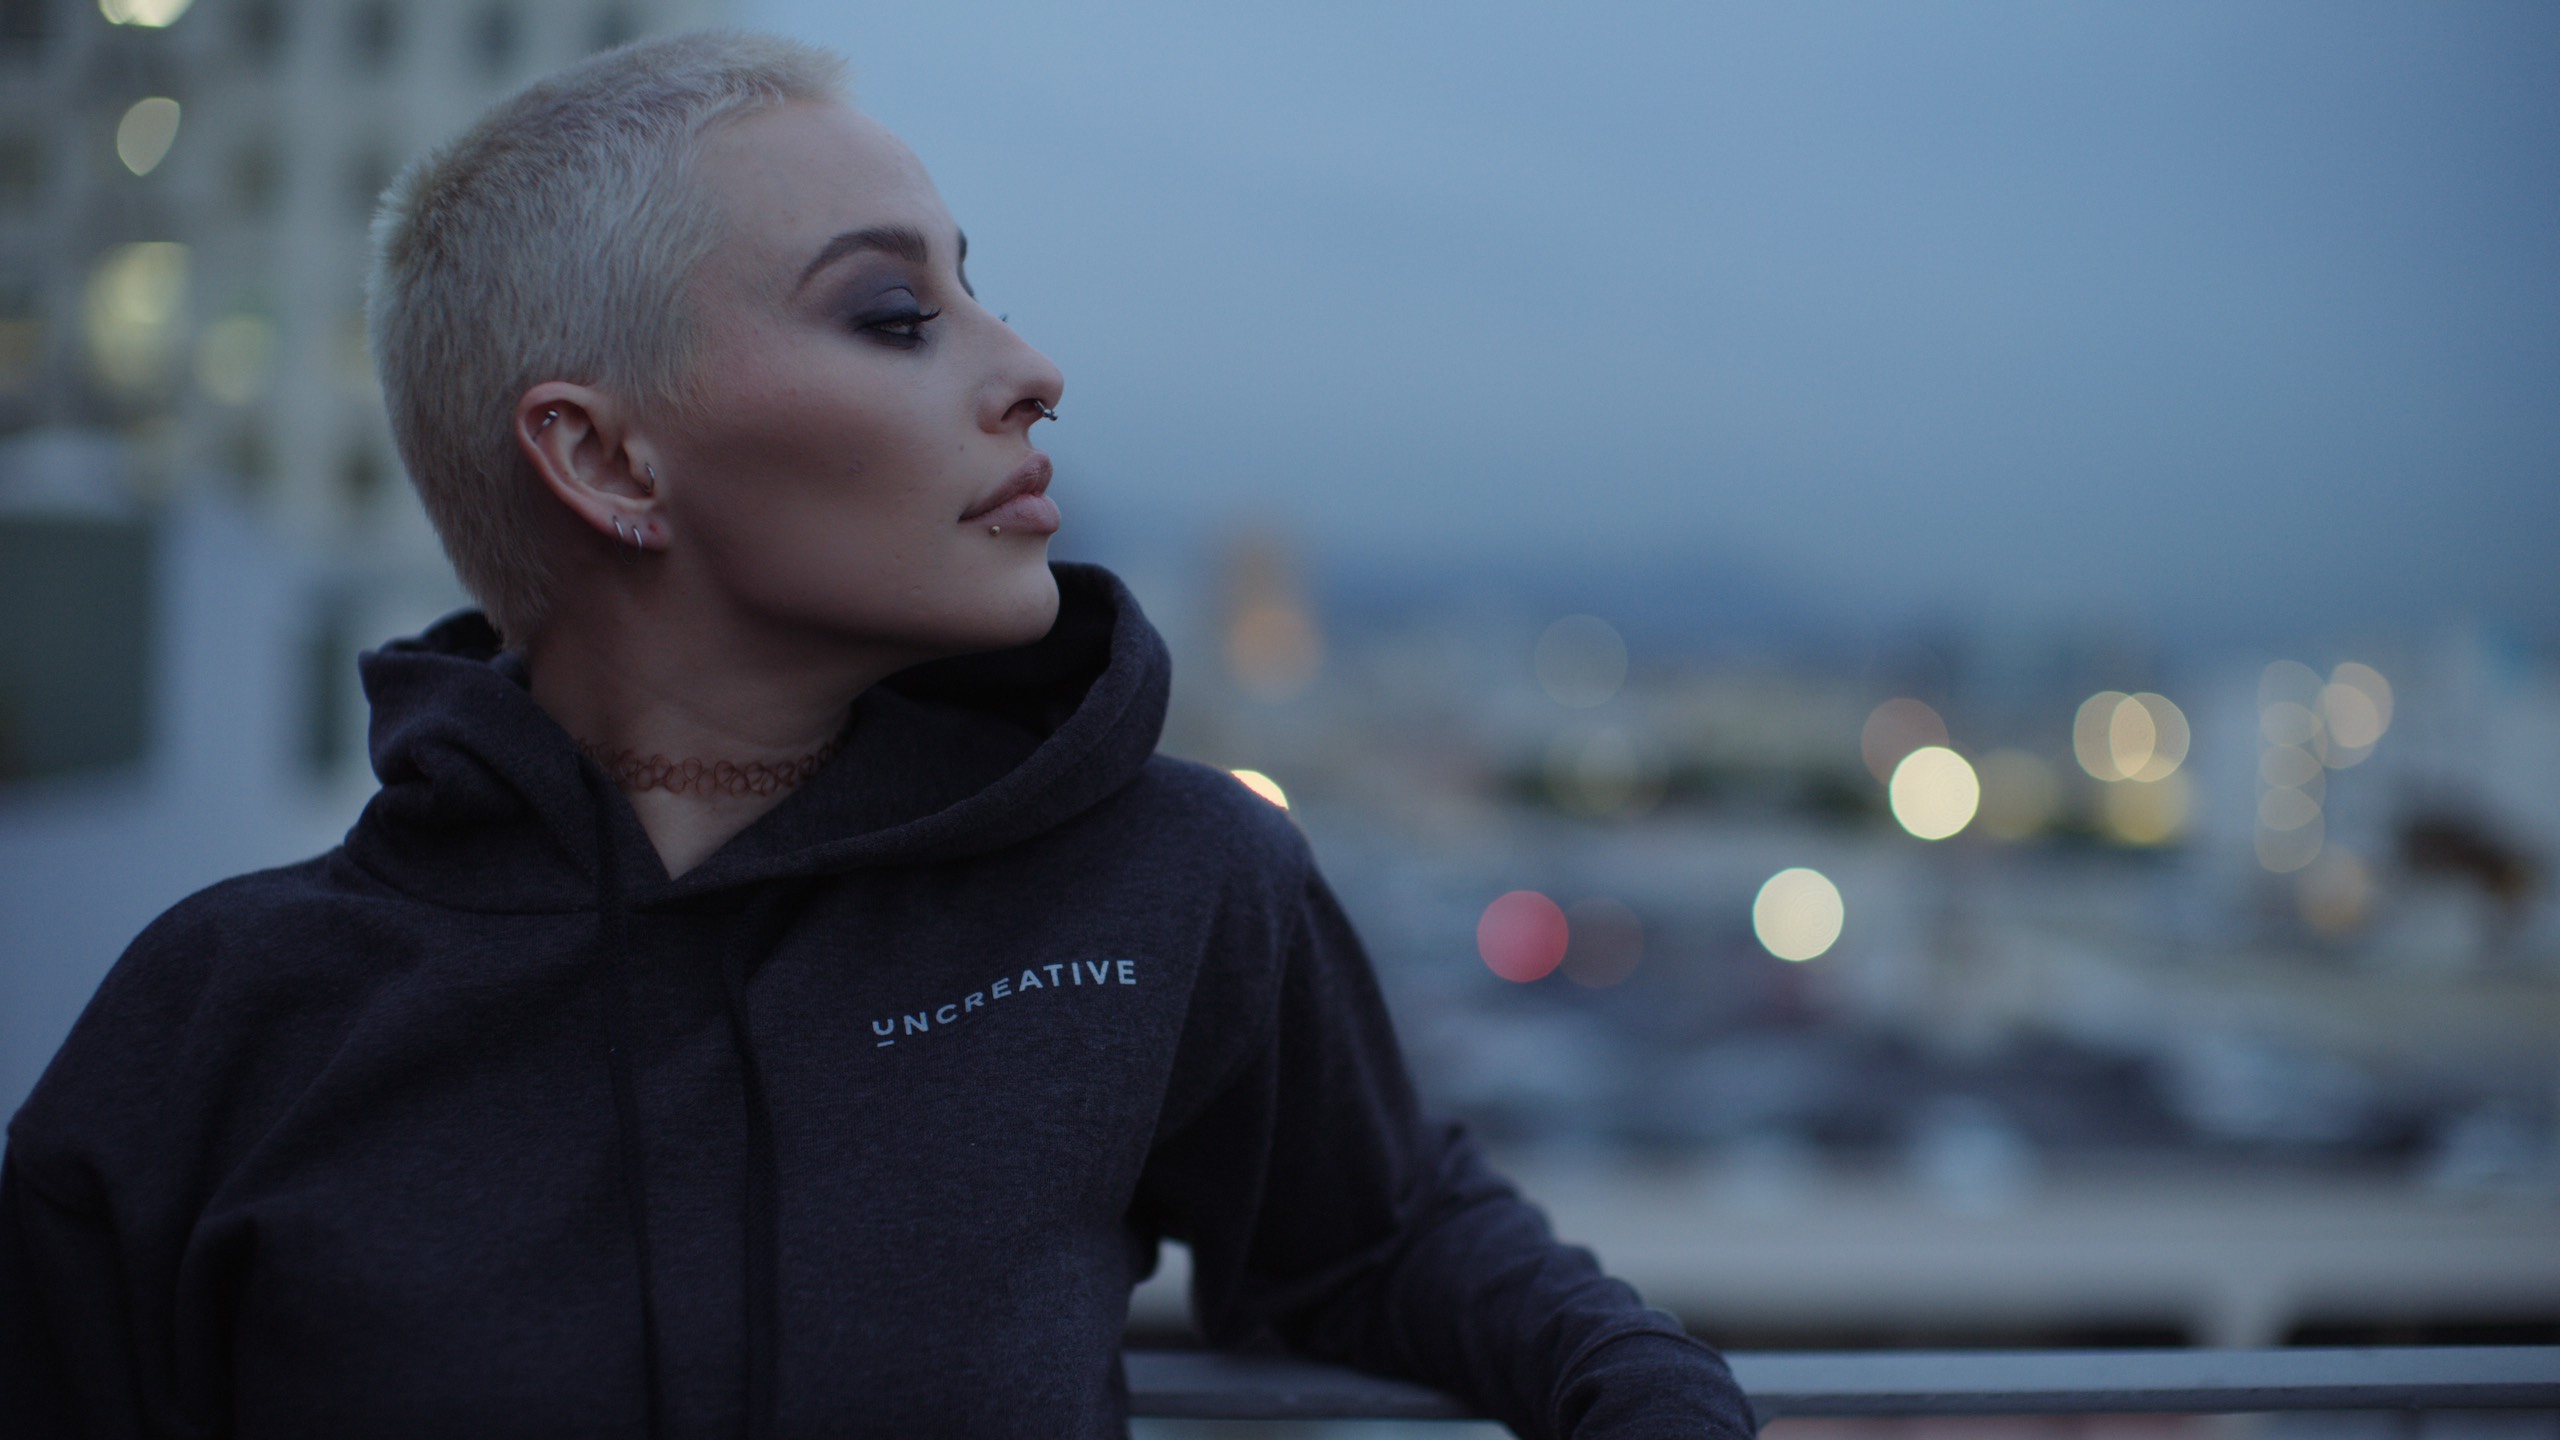 Uncreative Shop LA Apparel on available at the Uncreative Shop Woman with short blond hair wearing nose rings, jewelry and gray hoodie looking off to the side over her shoulder